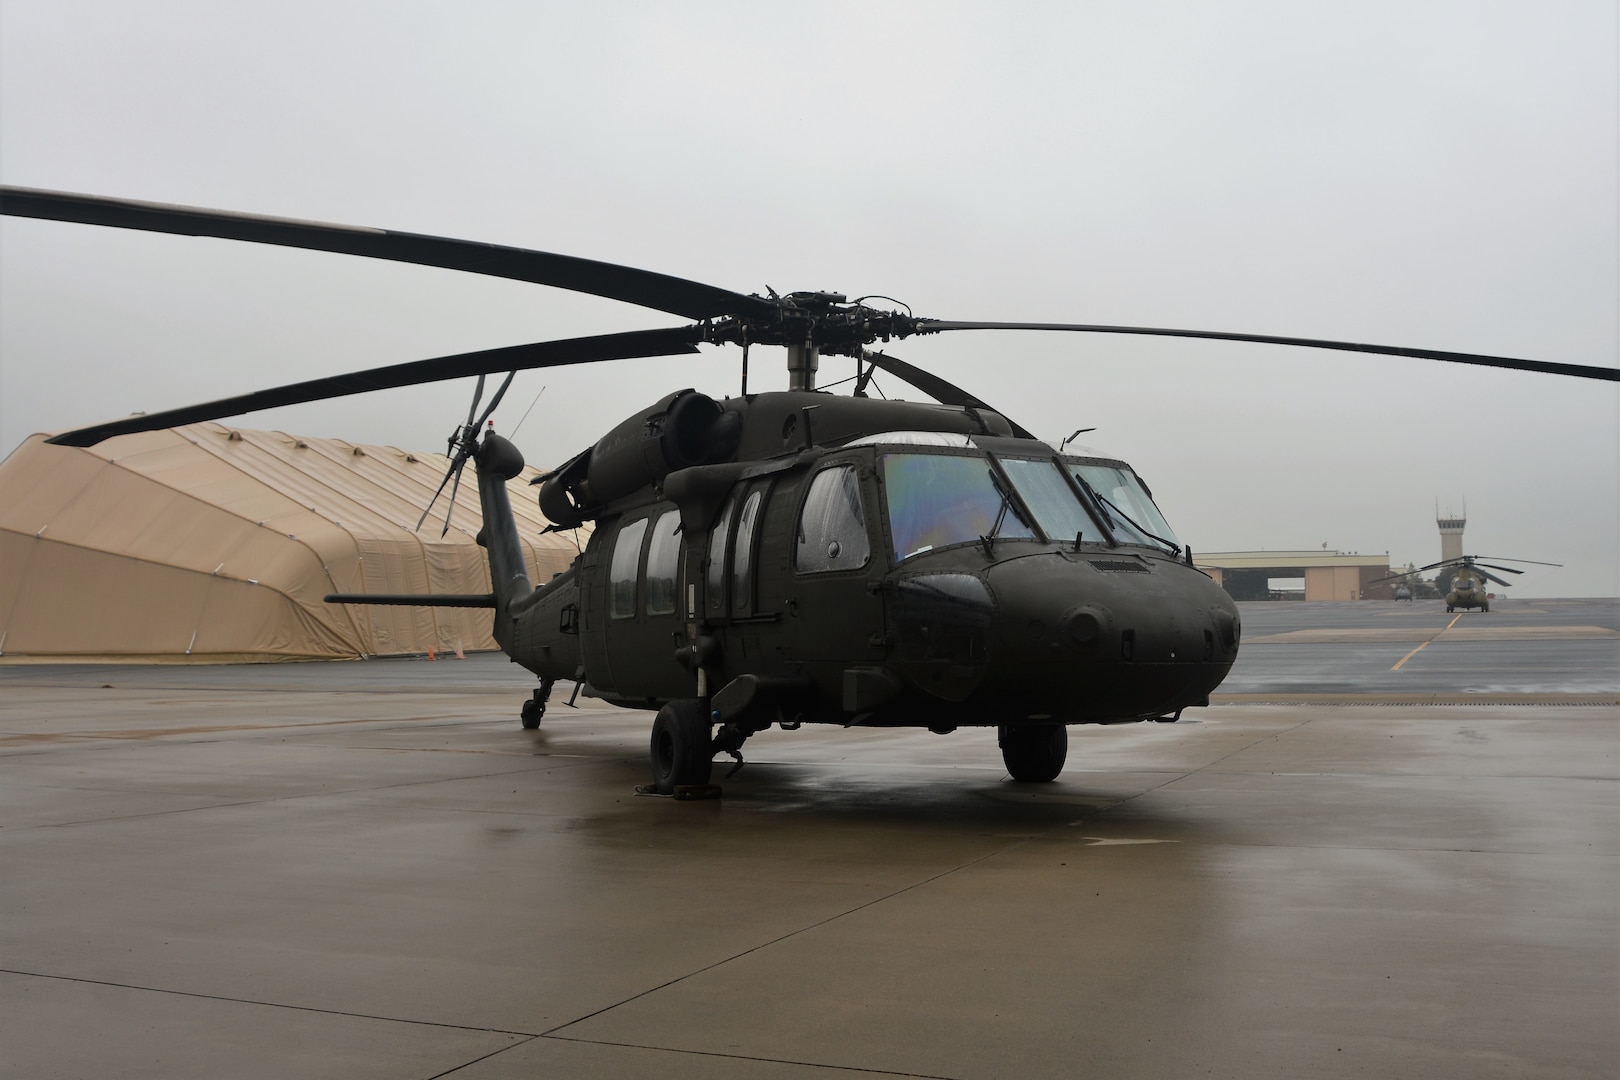 A UH-60V Black Hawk helicopter is parked on Muir Army Airfield for a ribbon-cutting ceremony for the new variant Oct. 6, 2021, at the Eastern Army National Guard Aviation Training Site at Fort Indiantown Gap, Pa. EAATS was the first unit in the Army – active-duty, National Guard or Army Reserve – to receive the new variant.